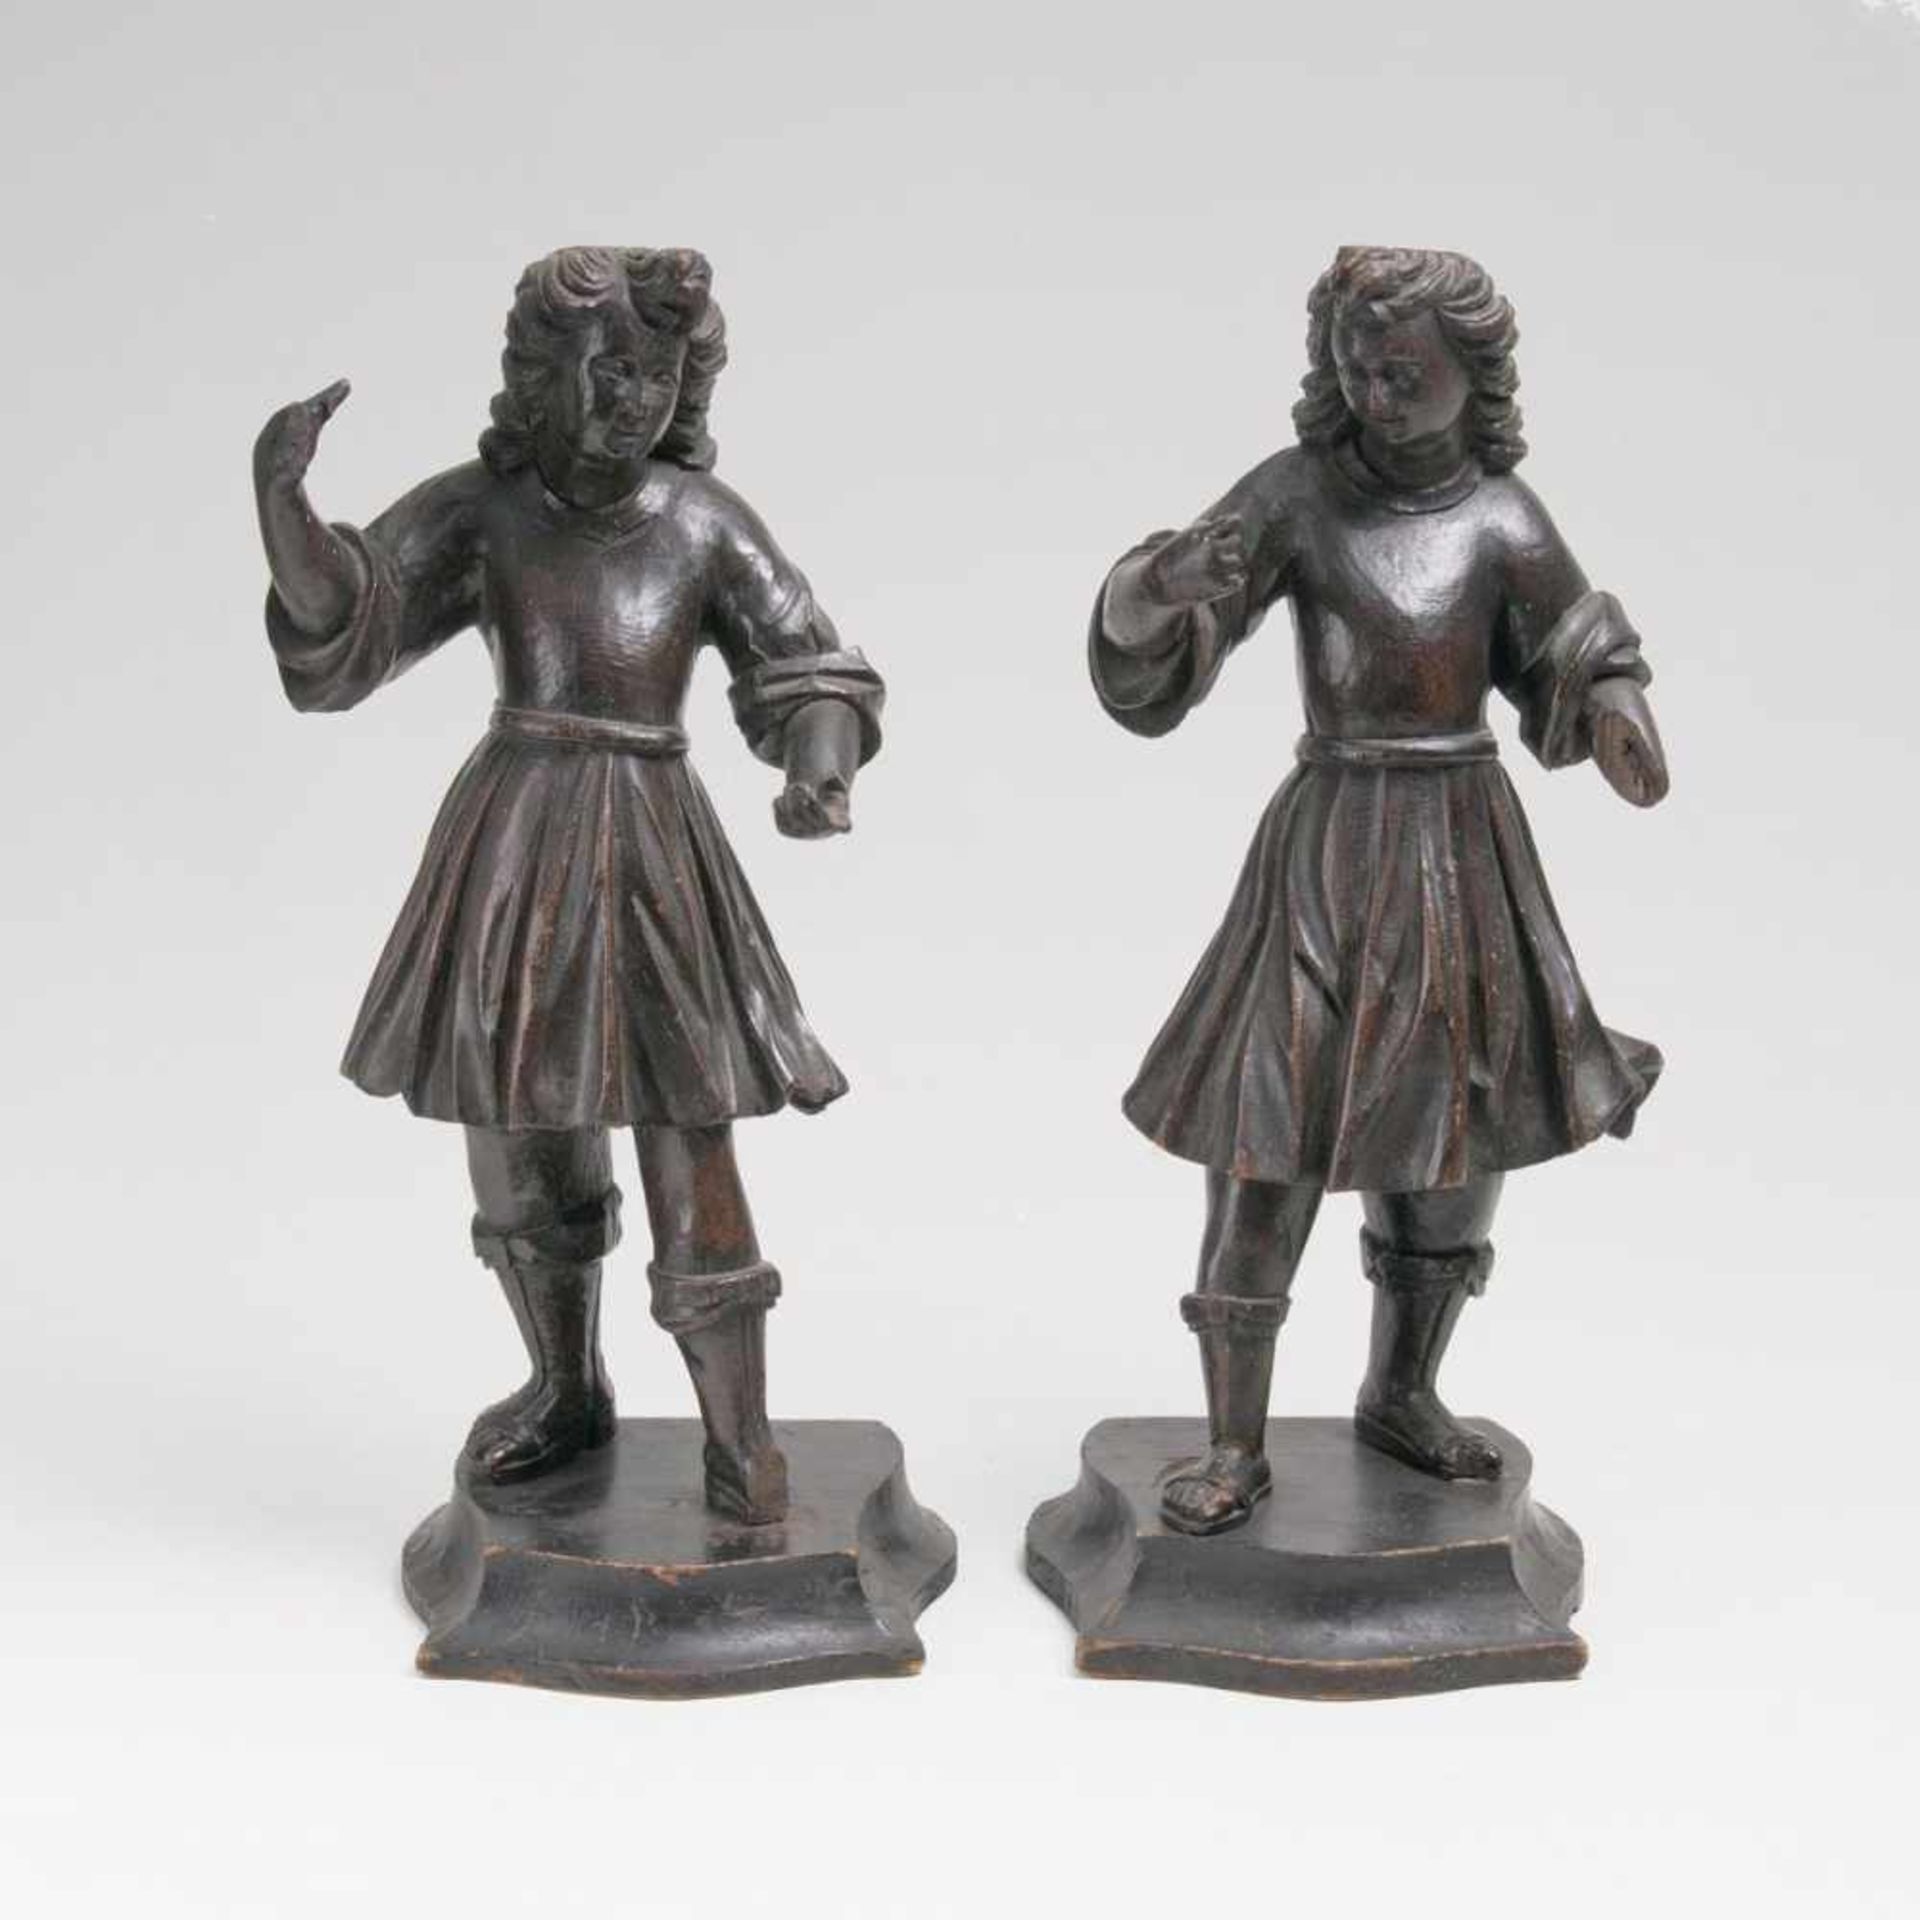 A Pair of AngelsTyrol, 17th cent. Dark stained coniferous wood, flat reverse. Wearing girded robes